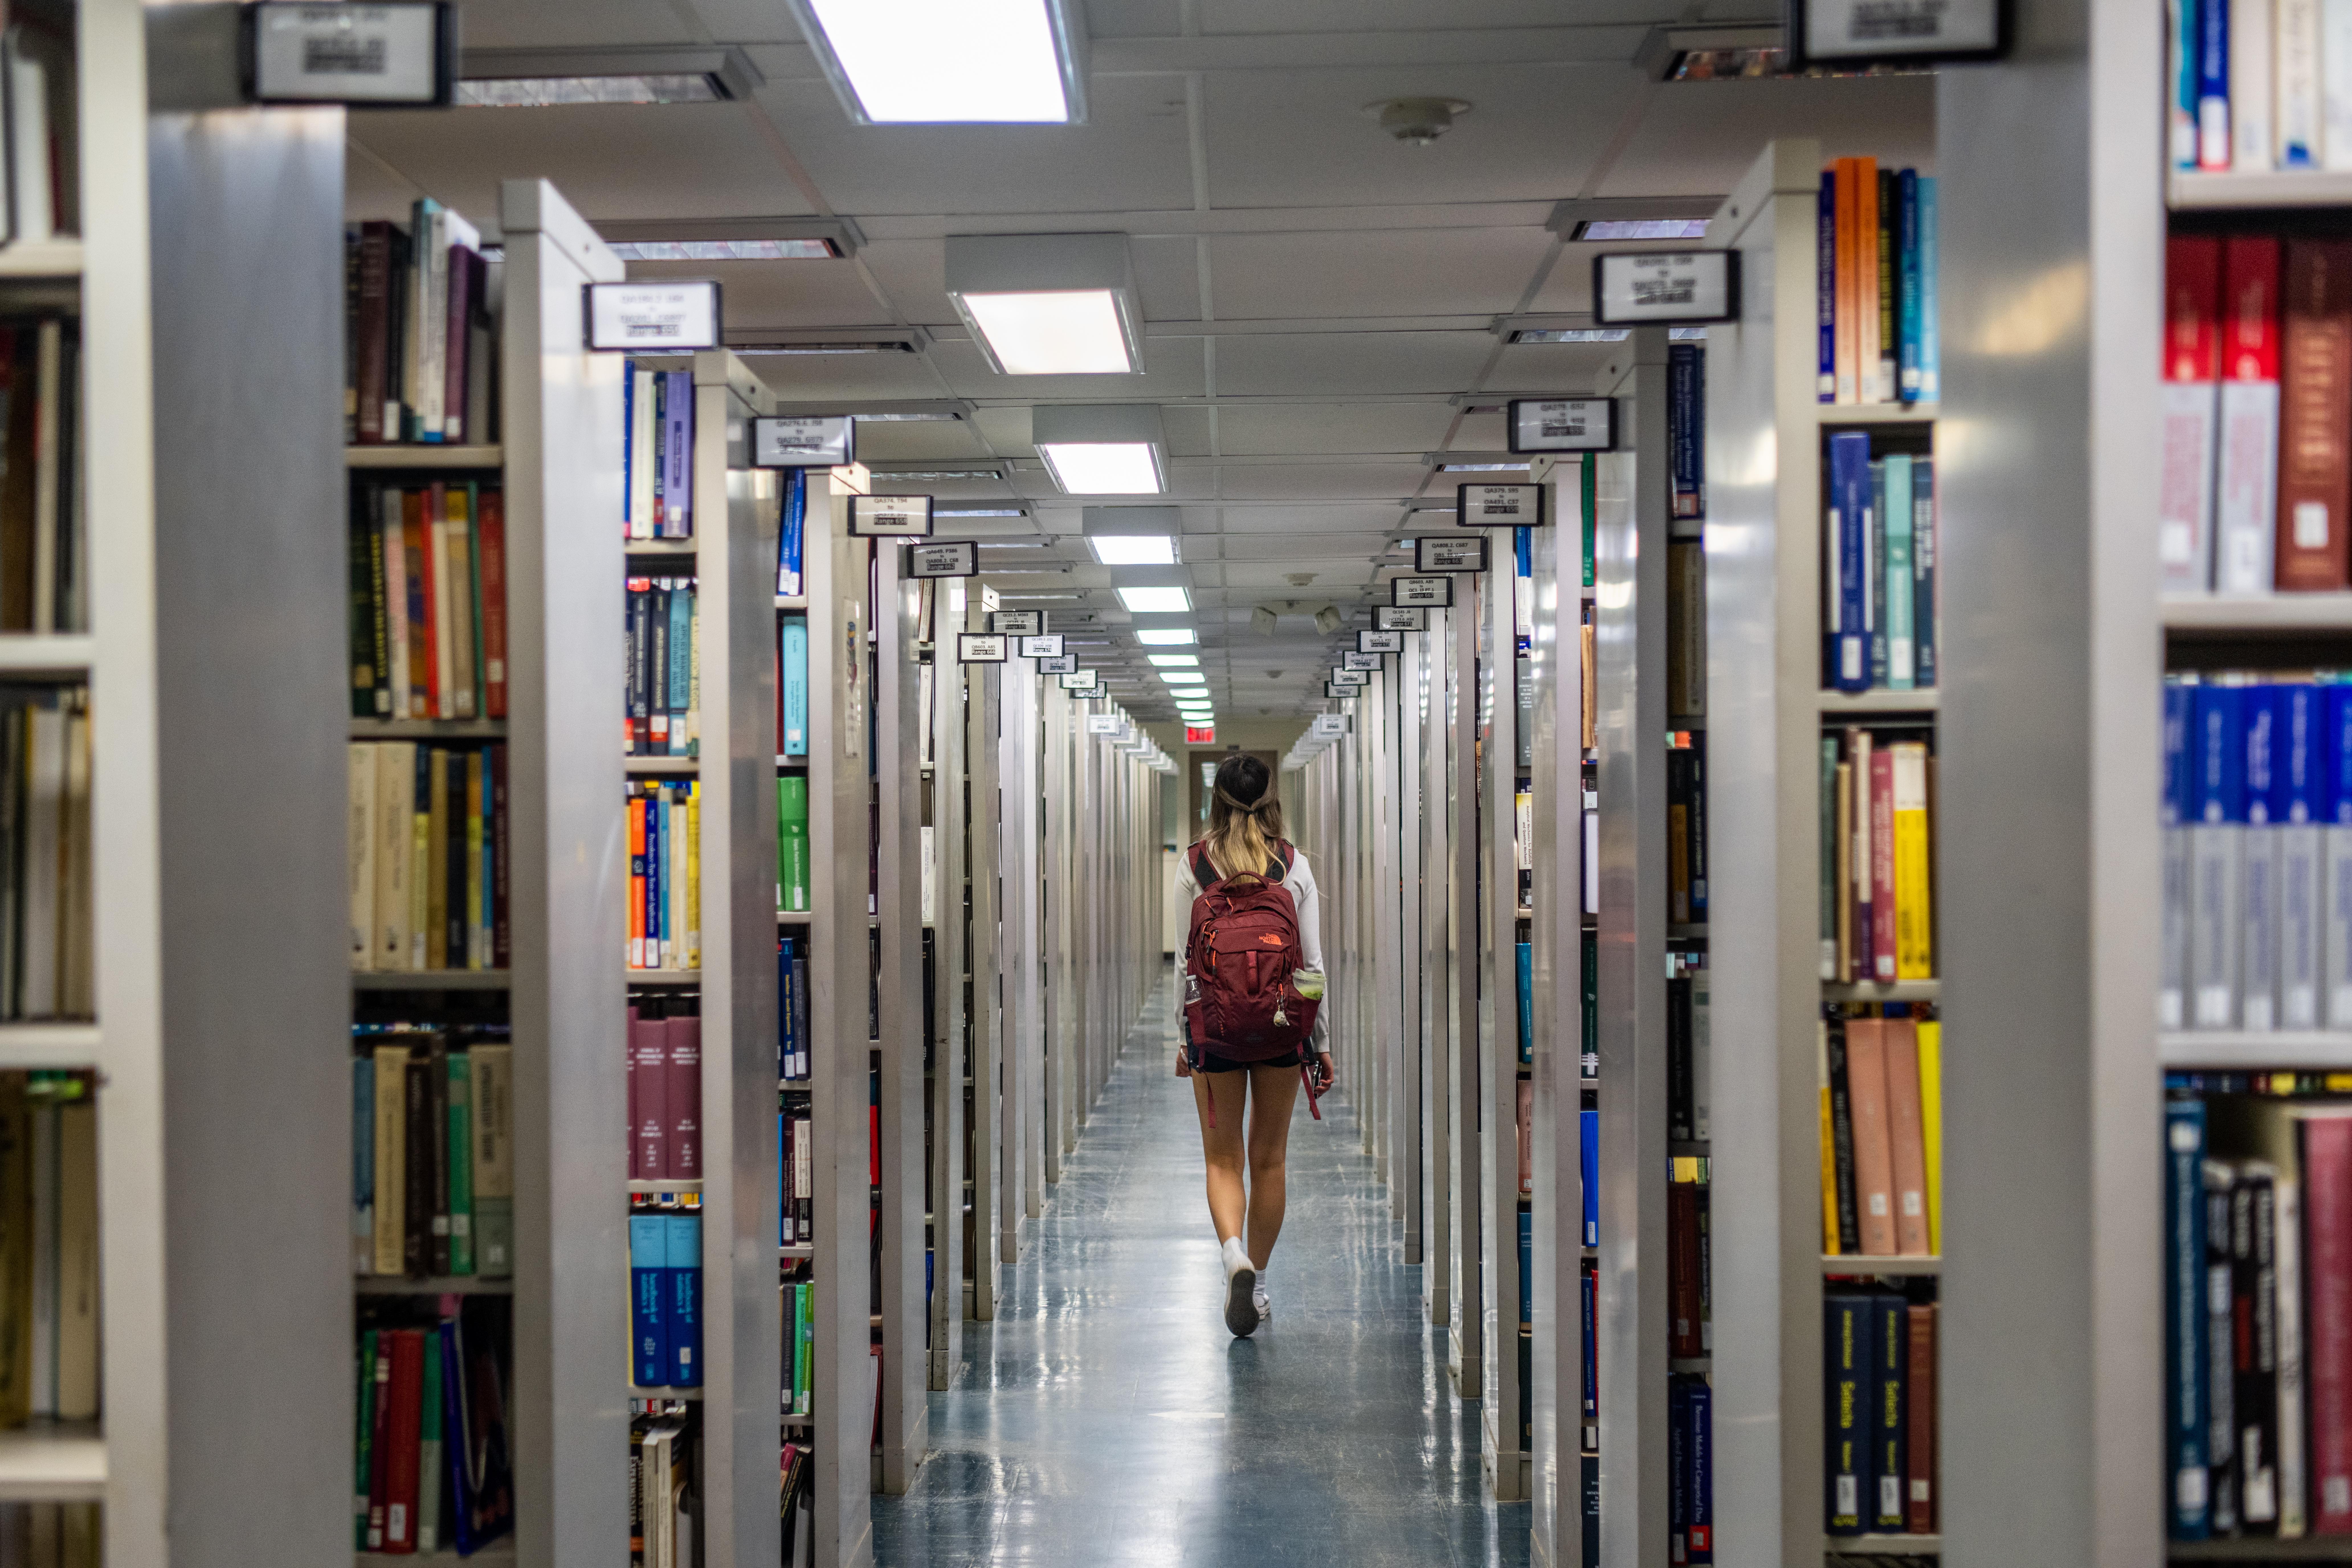 A person with a backpack walks through tall library shelves filled with books.